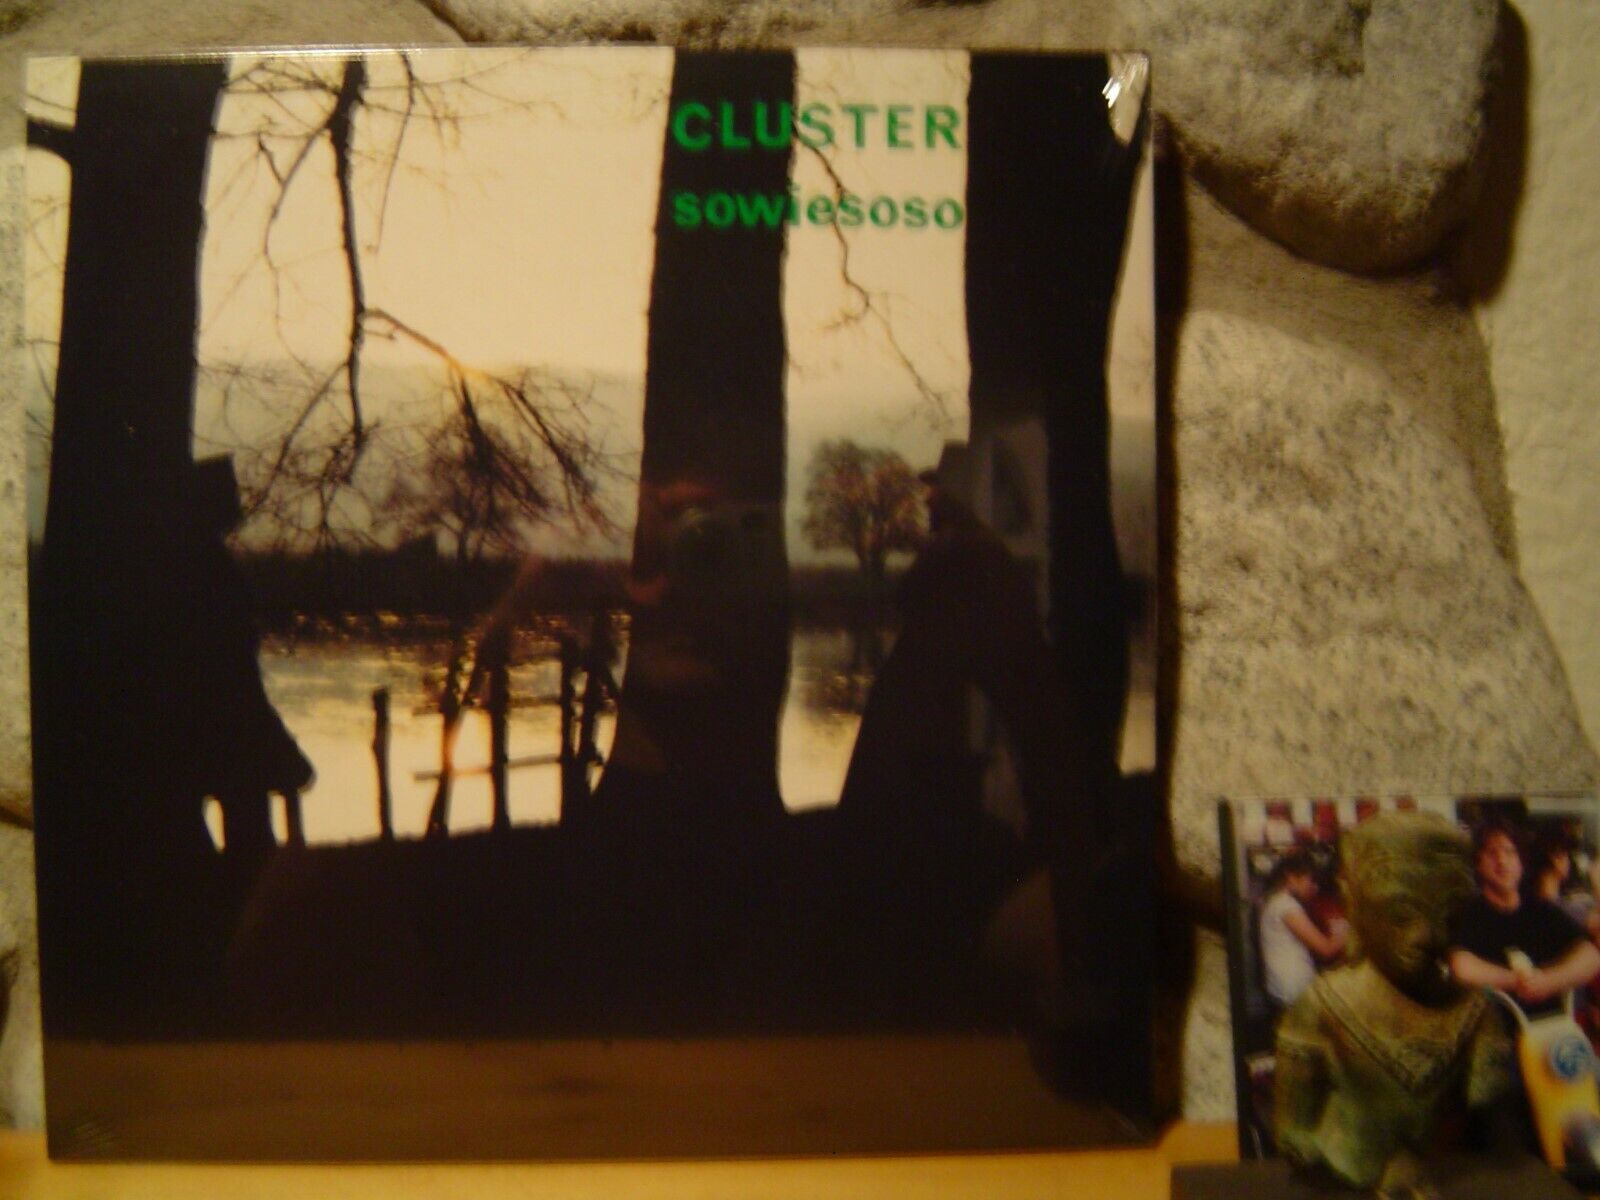 CLUSTER Sowiesoso LP/1976 Germany/Electronic/Kluster/Harmonia/Neu!/Brian Eno